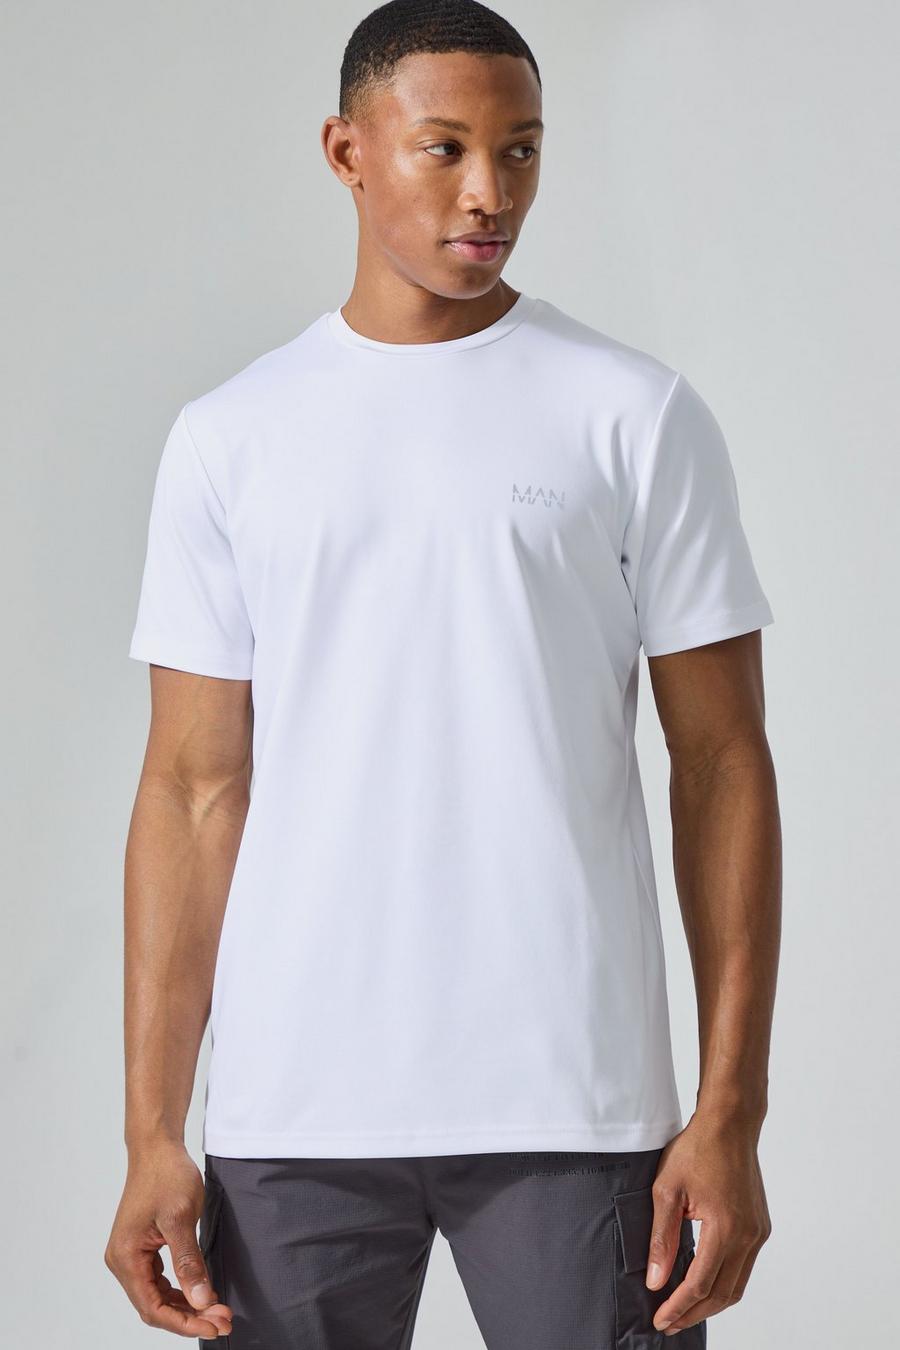 Man Active Performance Sport T-Shirt, White image number 1